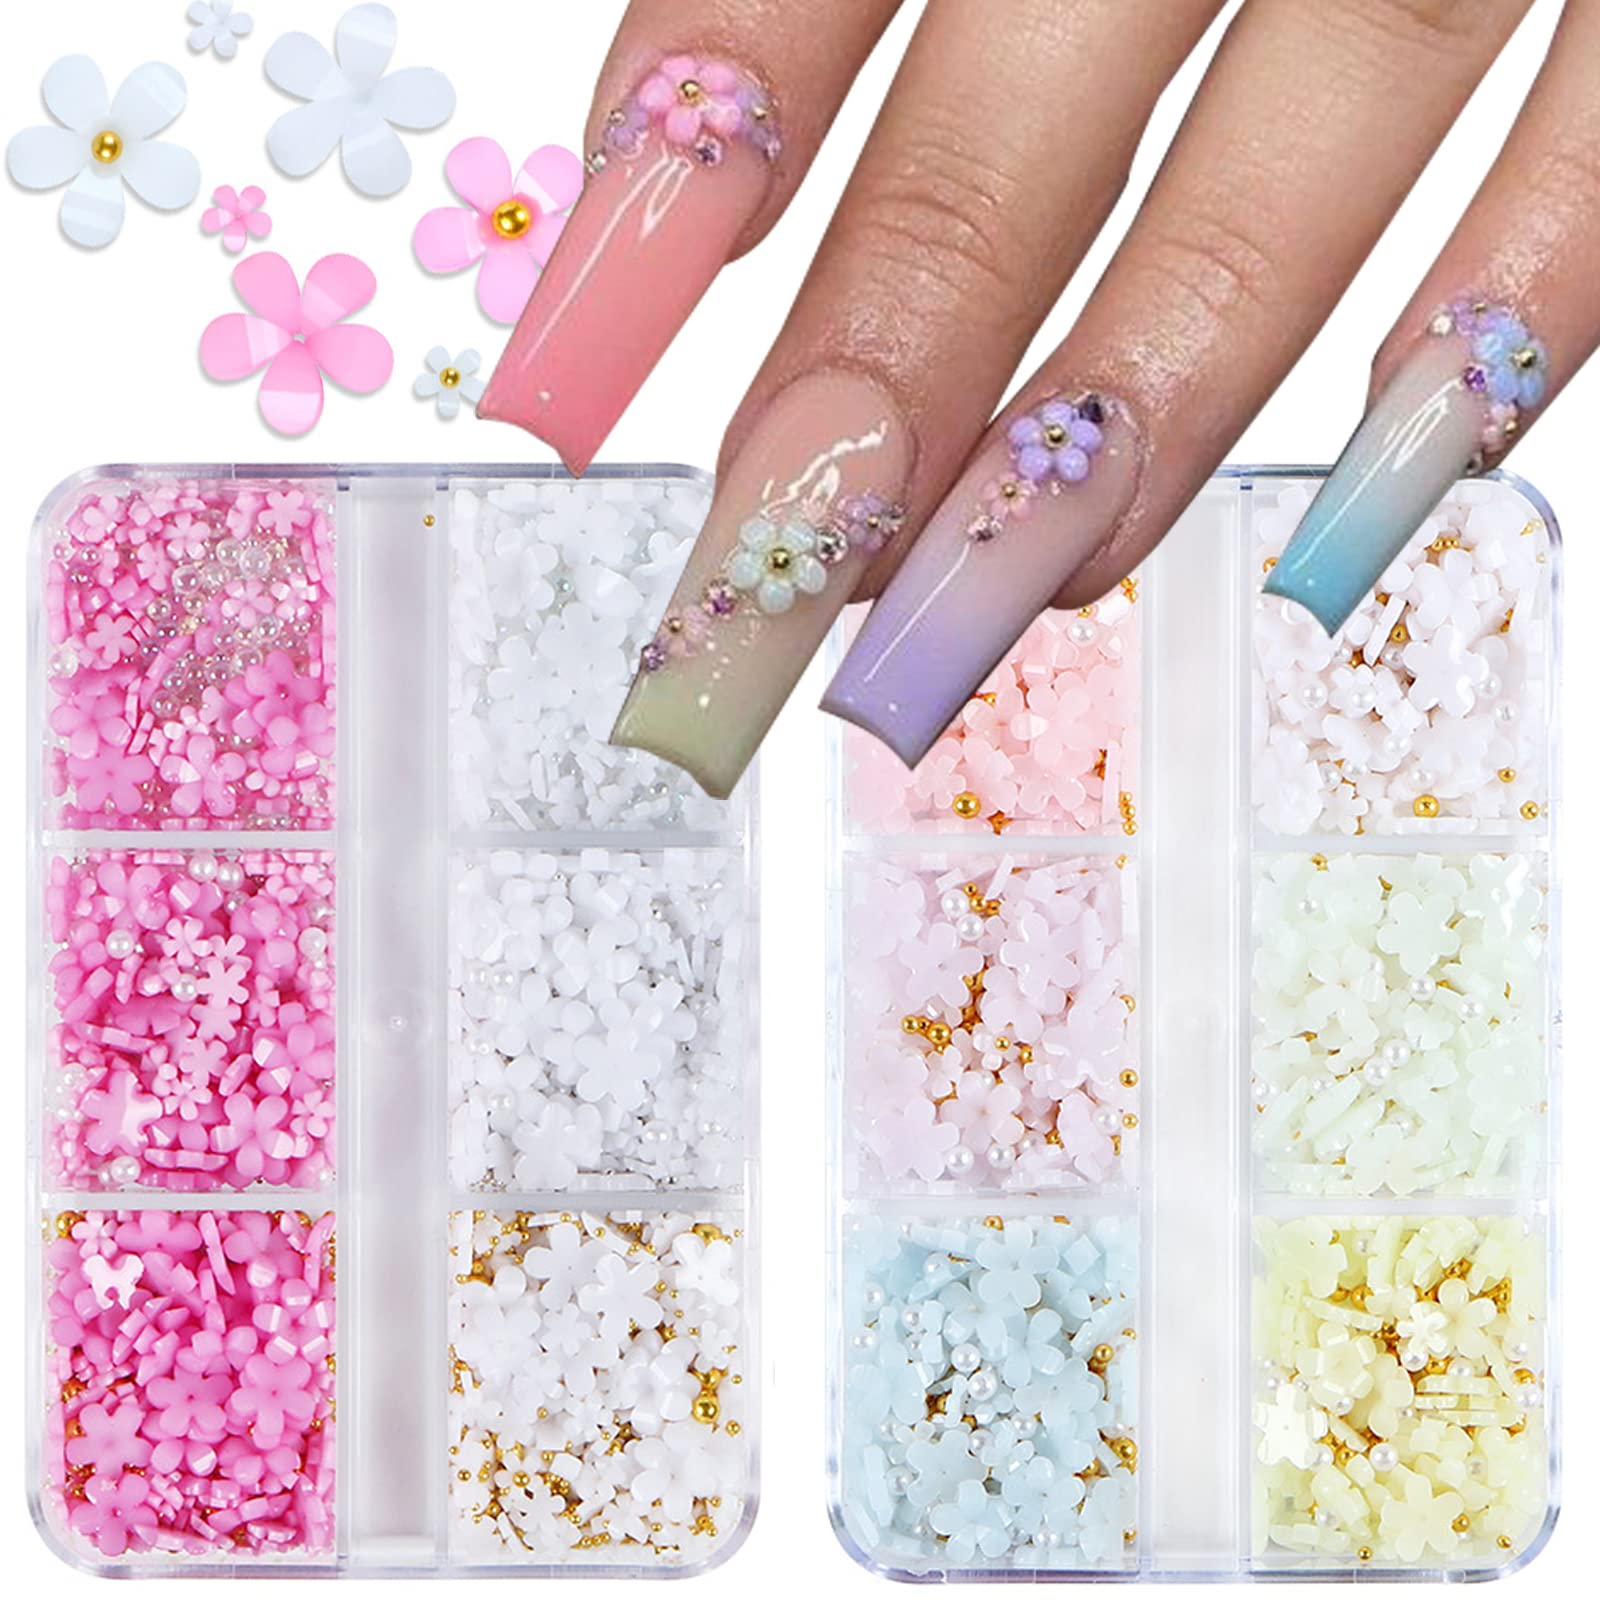 Rhinestones and Charms for Stunning Natural and Acrylic Nail Art